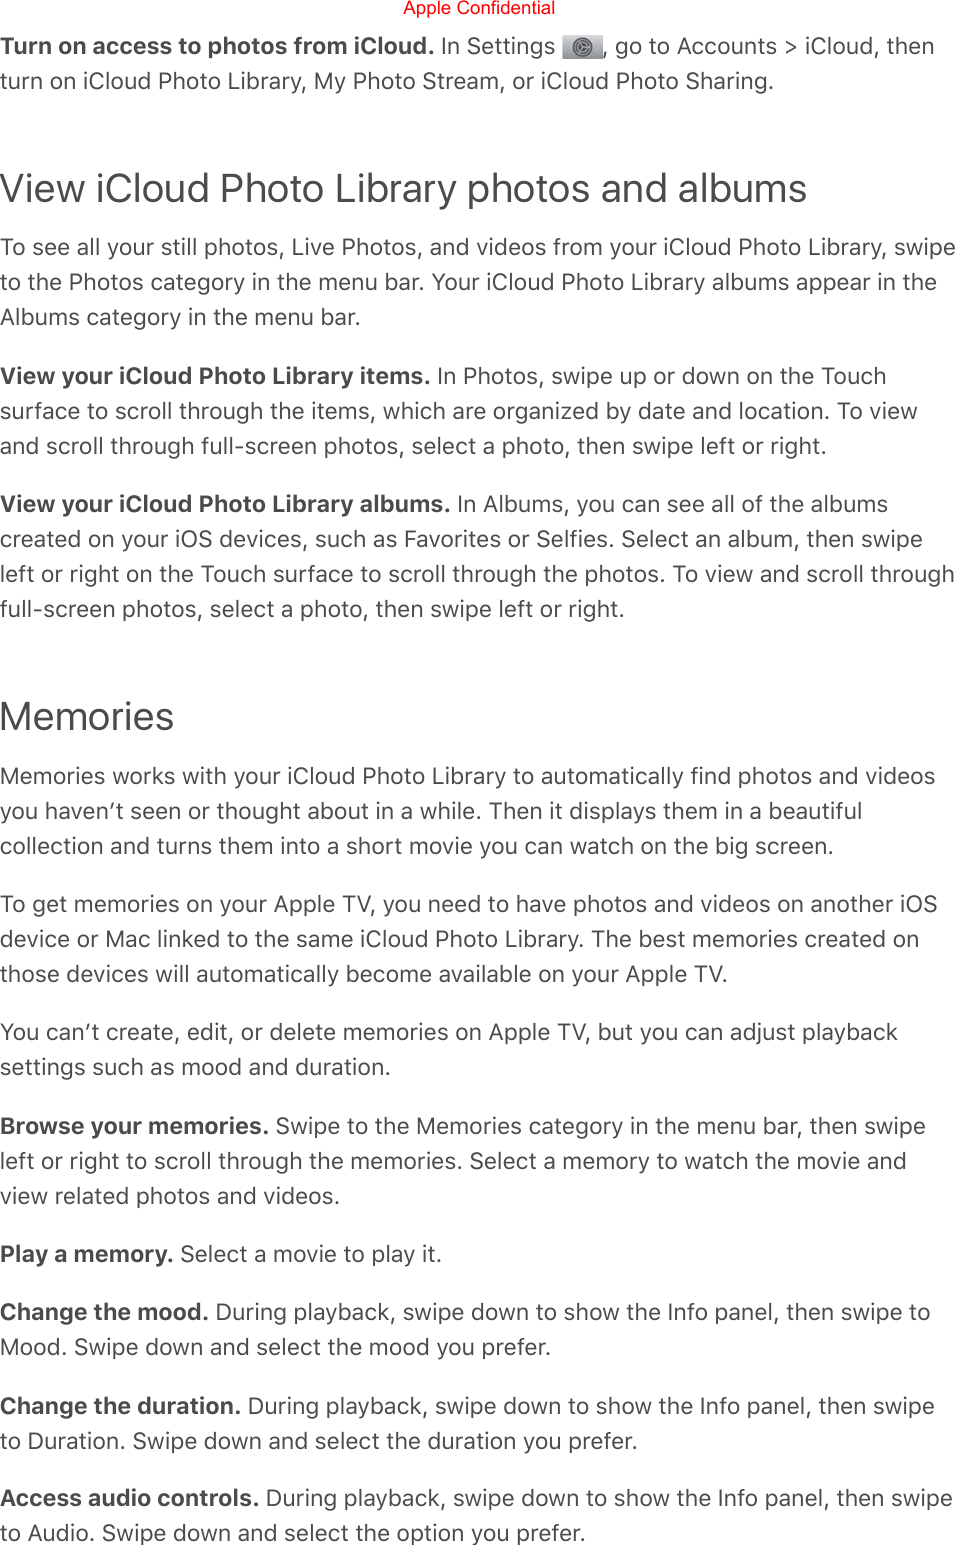 Turn on access to photos from iCloud. In Settings  , go to Accounts &gt; iCloud, thenturn on iCloud Photo Library, My Photo Stream, or iCloud Photo Sharing.View iCloud Photo Library photos and albumsTo see all your still photos, Live Photos, and videos from your iCloud Photo Library, swipeto the Photos category in the menu bar. Your iCloud Photo Library albums appear in theAlbums category in the menu bar.View your iCloud Photo Library items. In Photos, swipe up or down on the Touchsurface to scroll through the items, which are organized by date and location. To viewand scroll through full-screen photos, select a photo, then swipe left or right.View your iCloud Photo Library albums. In Albums, you can see all of the albumscreated on your iOS devices, such as Favorites or Selfies. Select an album, then swipeleft or right on the Touch surface to scroll through the photos. To view and scroll throughfull-screen photos, select a photo, then swipe left or right.MemoriesMemories works with your iCloud Photo Library to automatically find photos and videosyou havenʼt seen or thought about in a while. Then it displays them in a beautifulcollection and turns them into a short movie you can watch on the big screen.To get memories on your Apple TV, you need to have photos and videos on another iOSdevice or Mac linked to the same iCloud Photo Library. The best memories created onthose devices will automatically become available on your Apple TV.You canʼt create, edit, or delete memories on Apple TV, but you can adjust playbacksettings such as mood and duration.Browse your memories. Swipe to the Memories category in the menu bar, then swipeleft or right to scroll through the memories. Select a memory to watch the movie andview related photos and videos.Play a memory. Select a movie to play it.Change the mood. During playback, swipe down to show the Info panel, then swipe toMood. Swipe down and select the mood you prefer.Change the duration. During playback, swipe down to show the Info panel, then swipeto Duration. Swipe down and select the duration you prefer.Access audio controls. During playback, swipe down to show the Info panel, then swipeto Audio. Swipe down and select the option you prefer.Apple Confidential